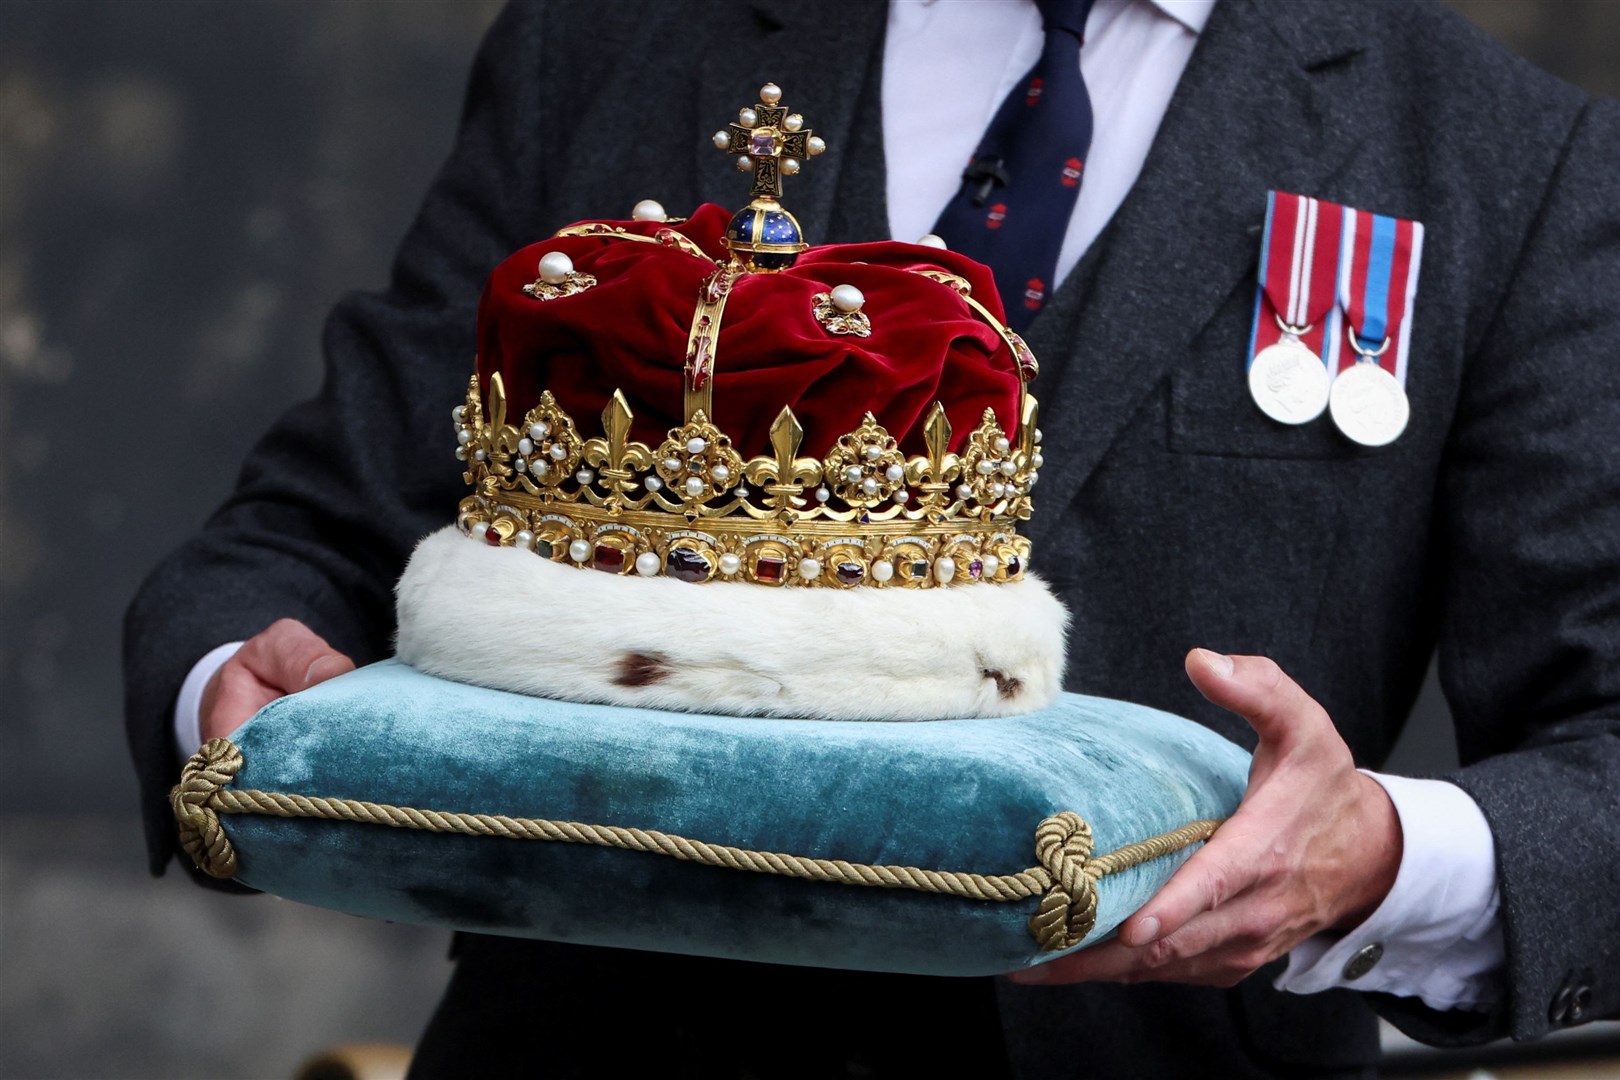 The Crown, which forms part of the Honours of Scotland (Phil Nobel/PA)